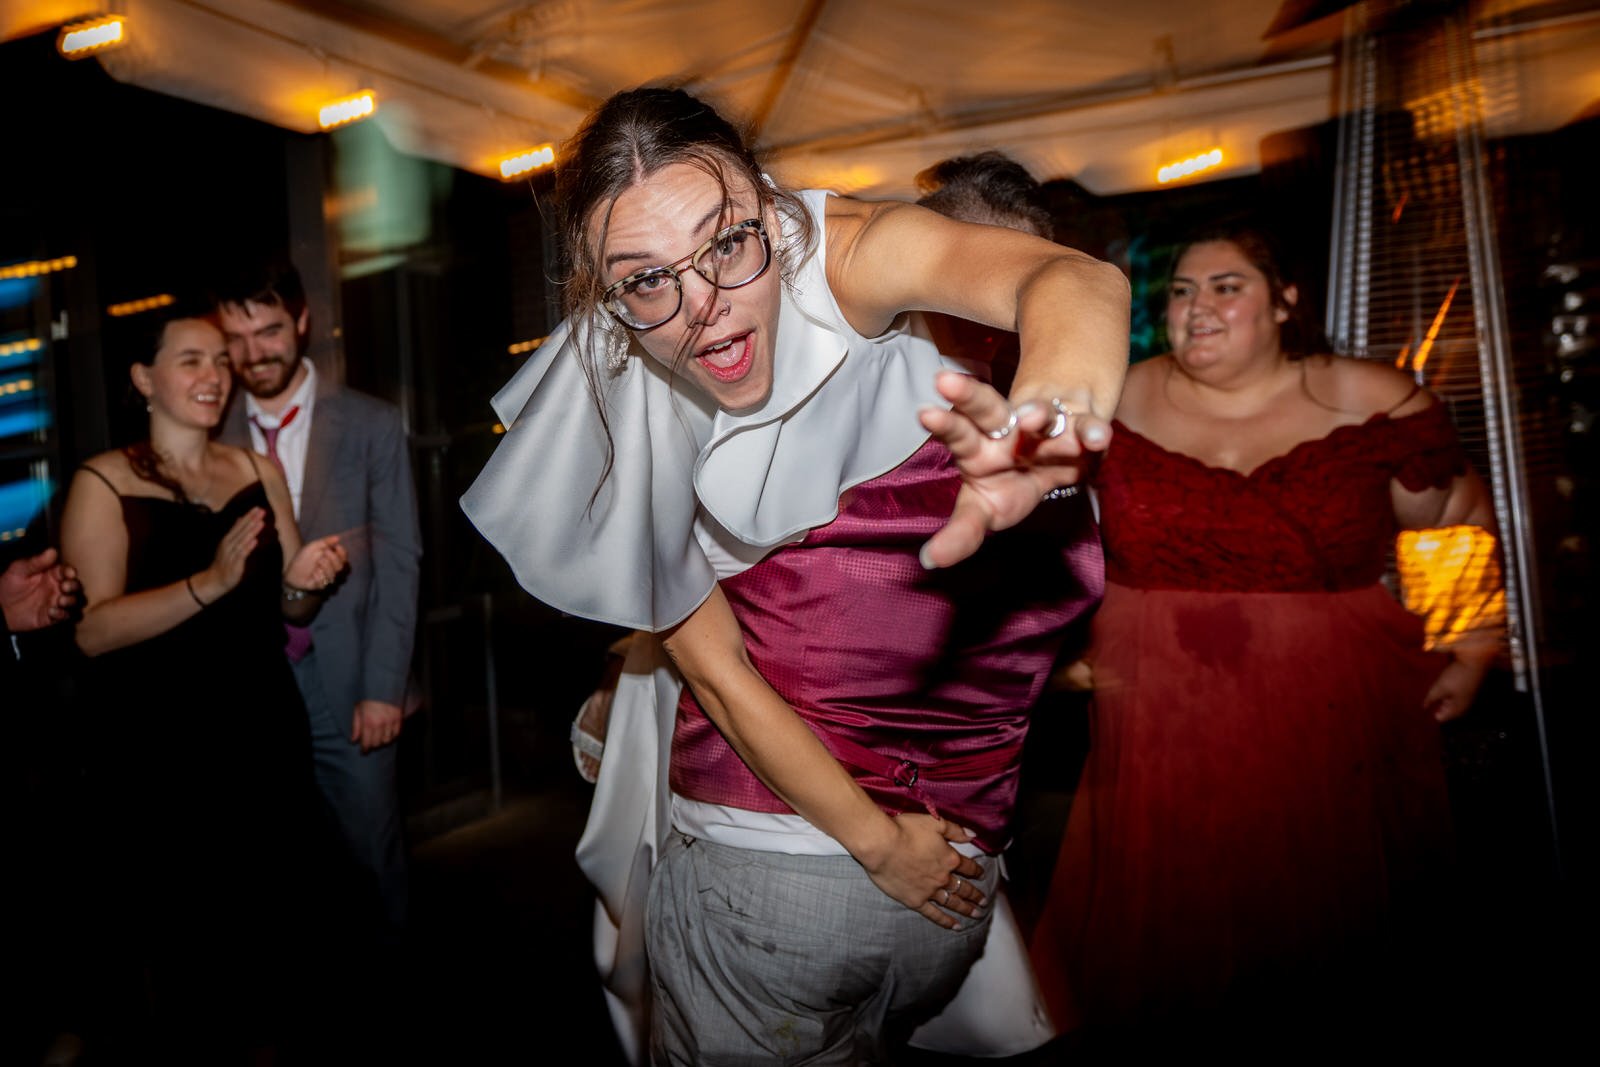 Ampersea_Baltimore_Maryland_Wedding_Suzanne&Andrew_Dance_Party-7205.jpg